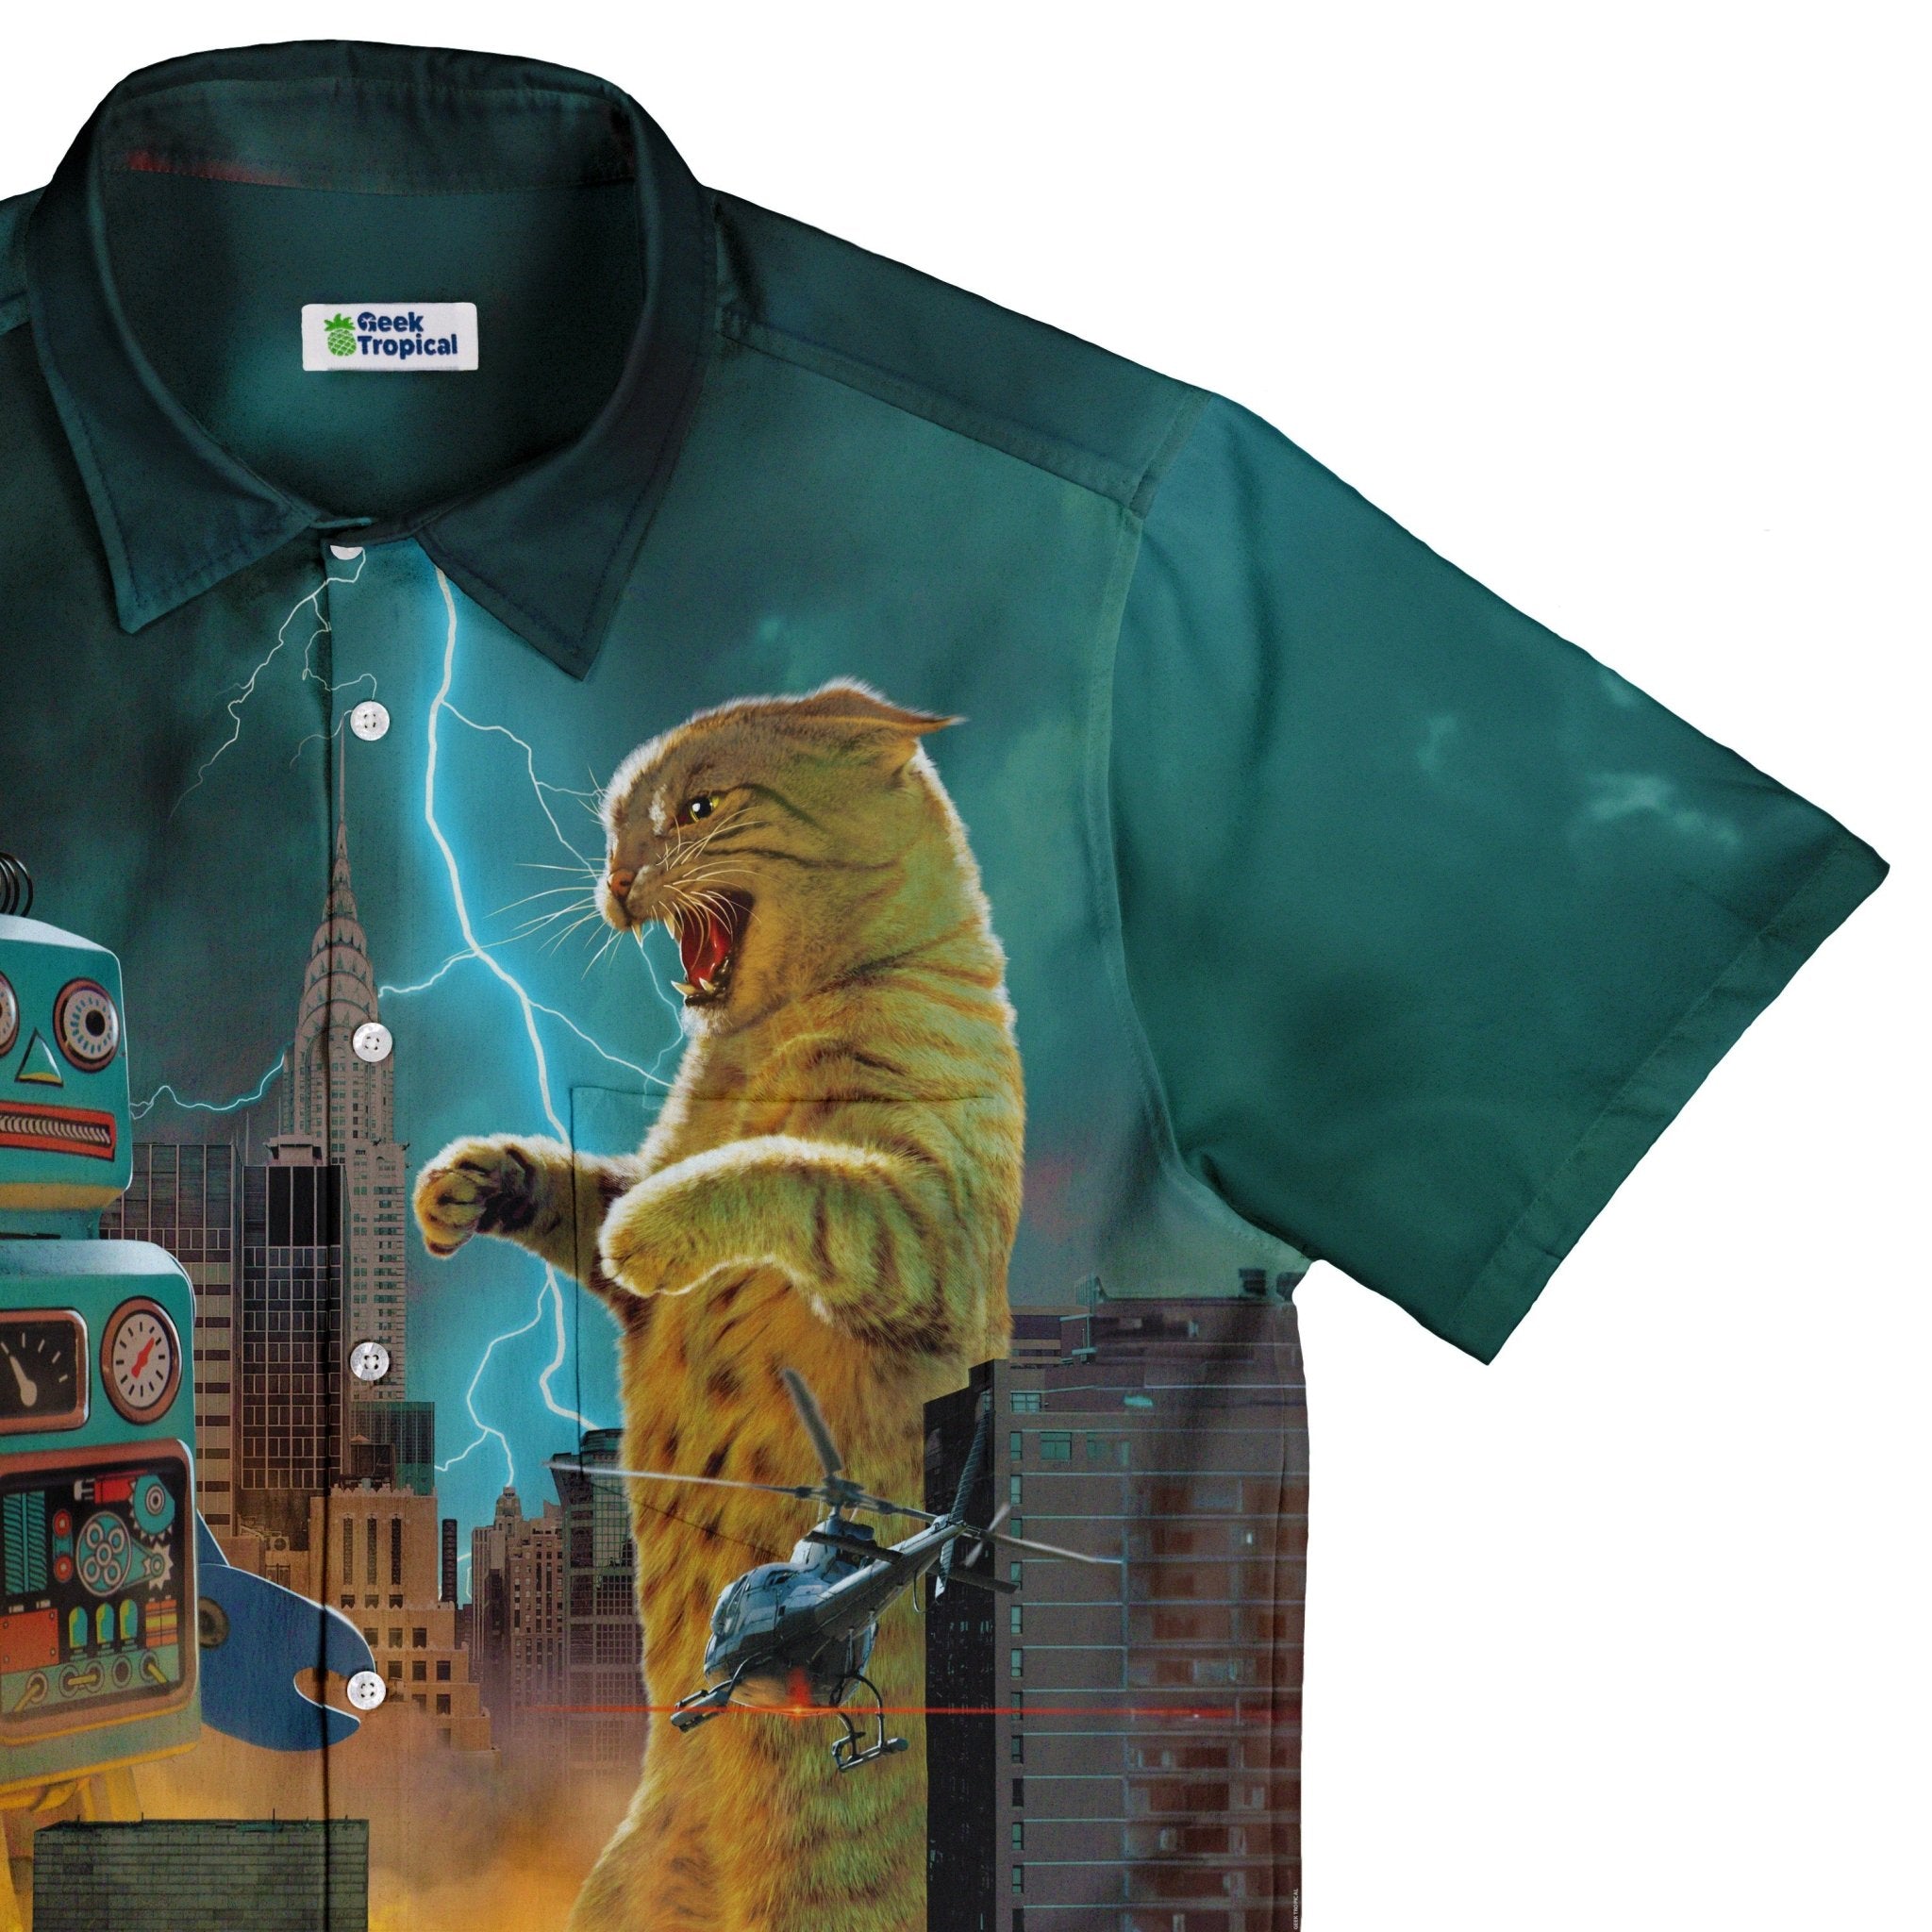 Catzilla vs Robot Button Up Shirt - adult sizing - Animal Patterns - Design by Vincent Hie